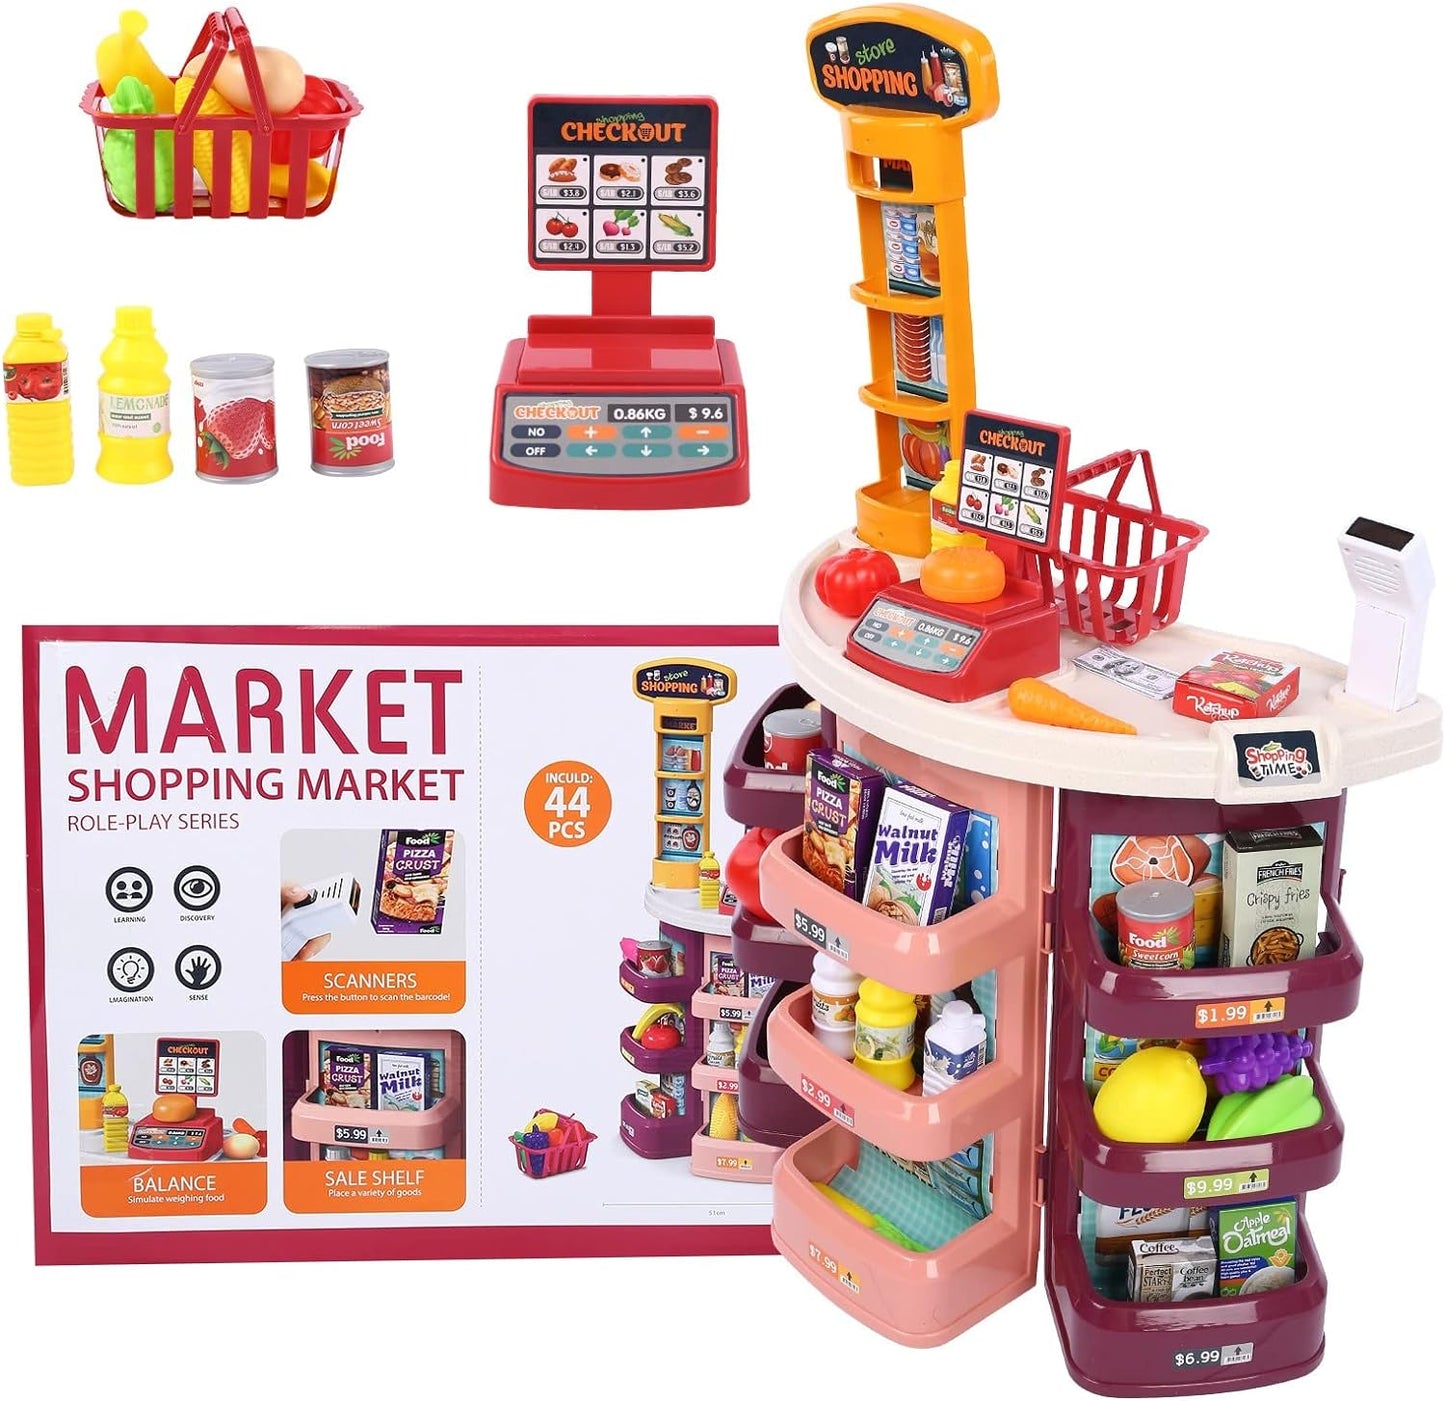 Pretend Play Kids Grocery Store, Supermarket Play Set with Cash Register Scanner Fruits Vegetables Boxes Bottles Stickers and More for Boys Girls